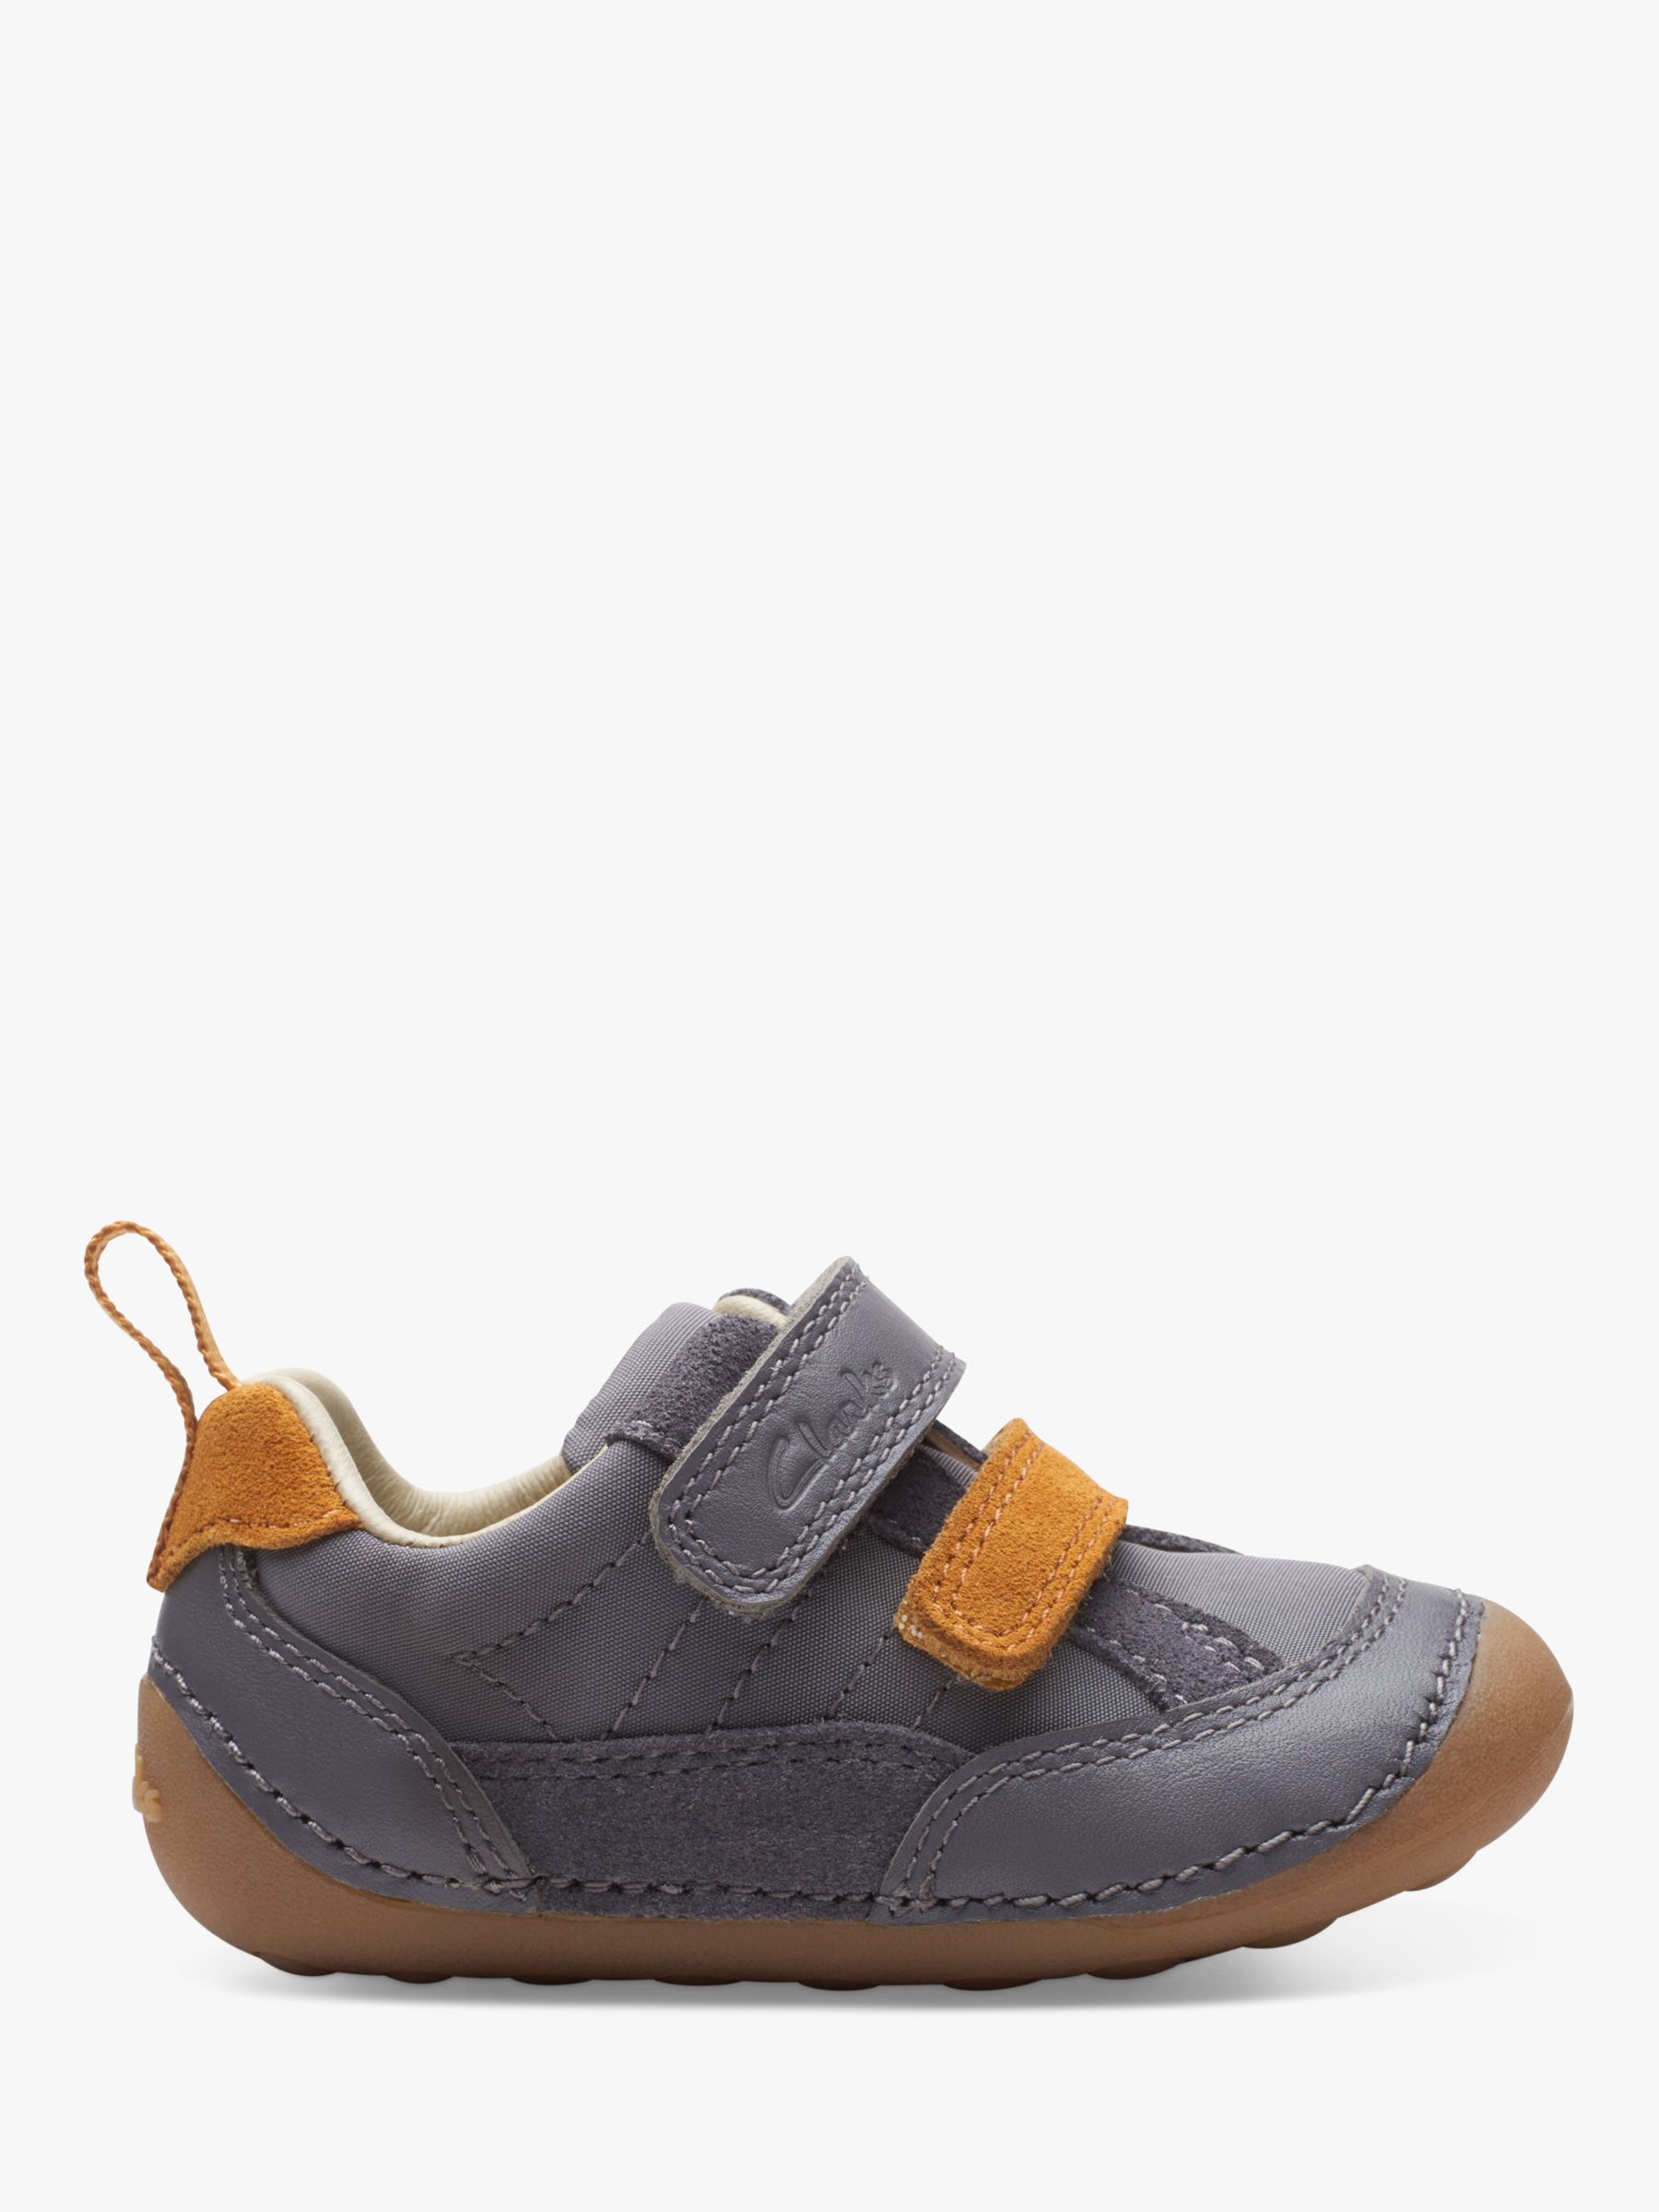 Clarks Baby Fawn Pre-Walker at John Lewis & Partners